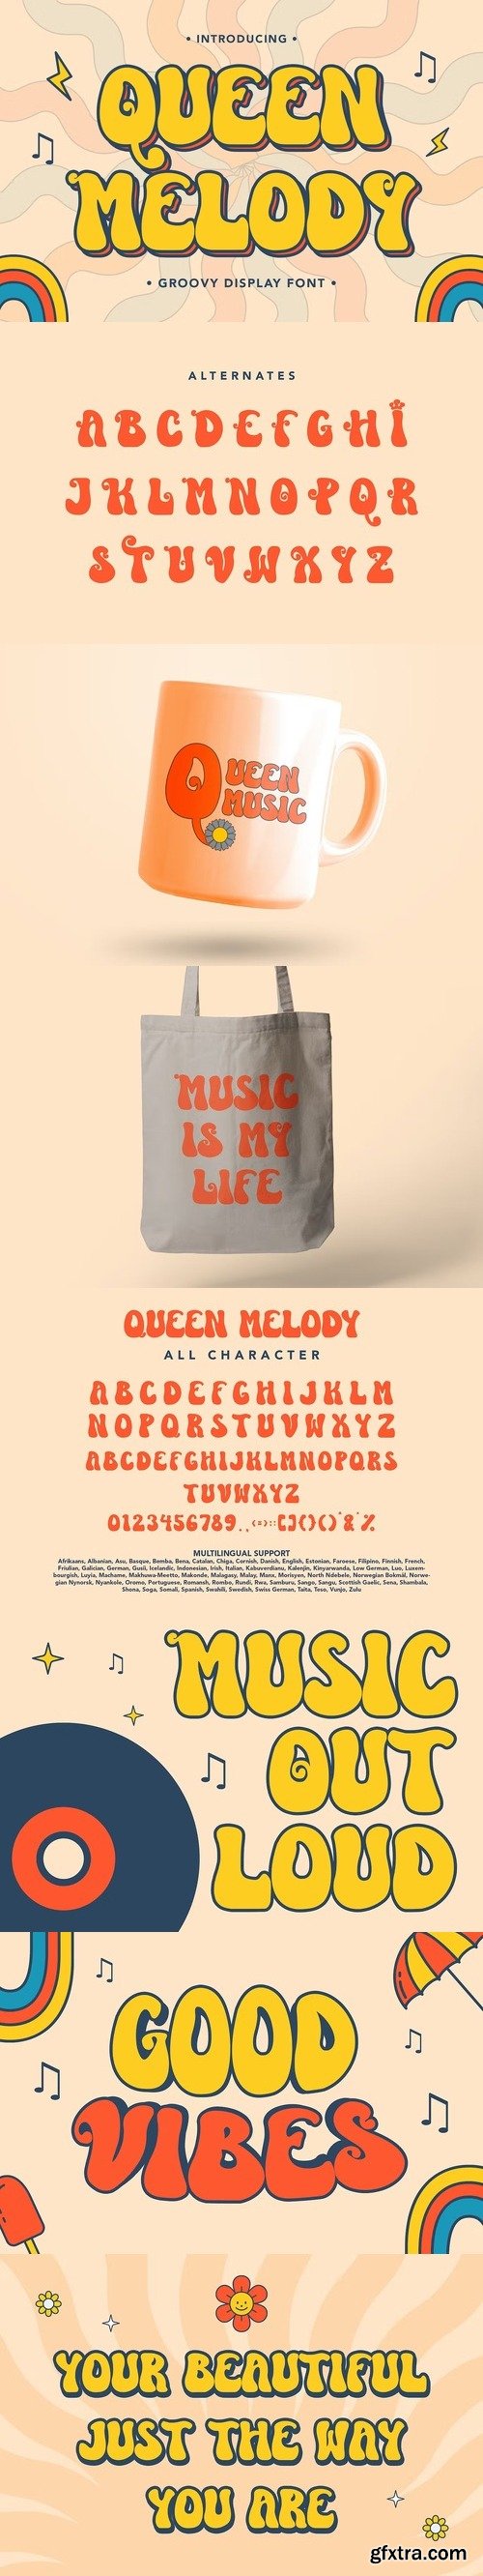 Queen Melody - Groovy Display Font